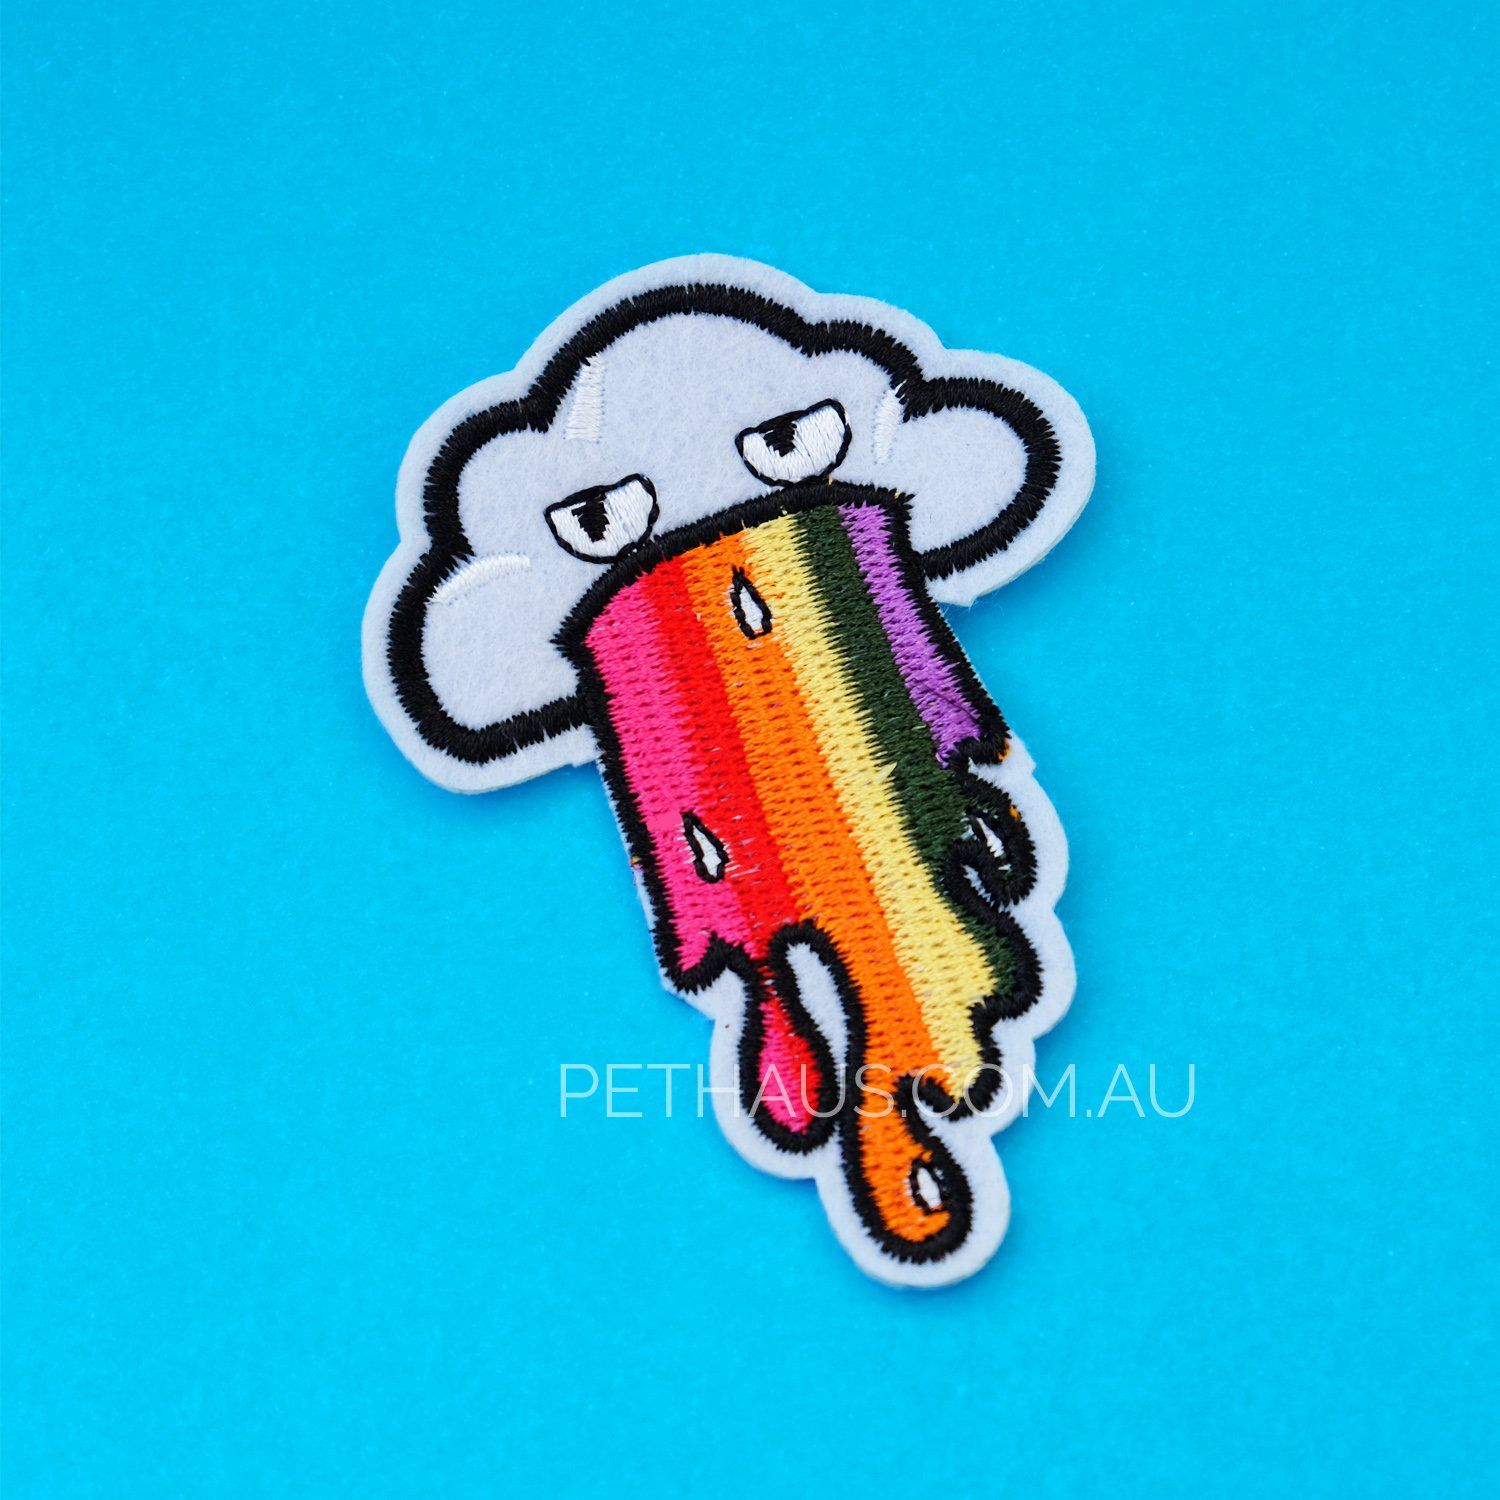 Puking rainbows embroidered patch, cute embroidered patch, rainbow embroidered patch